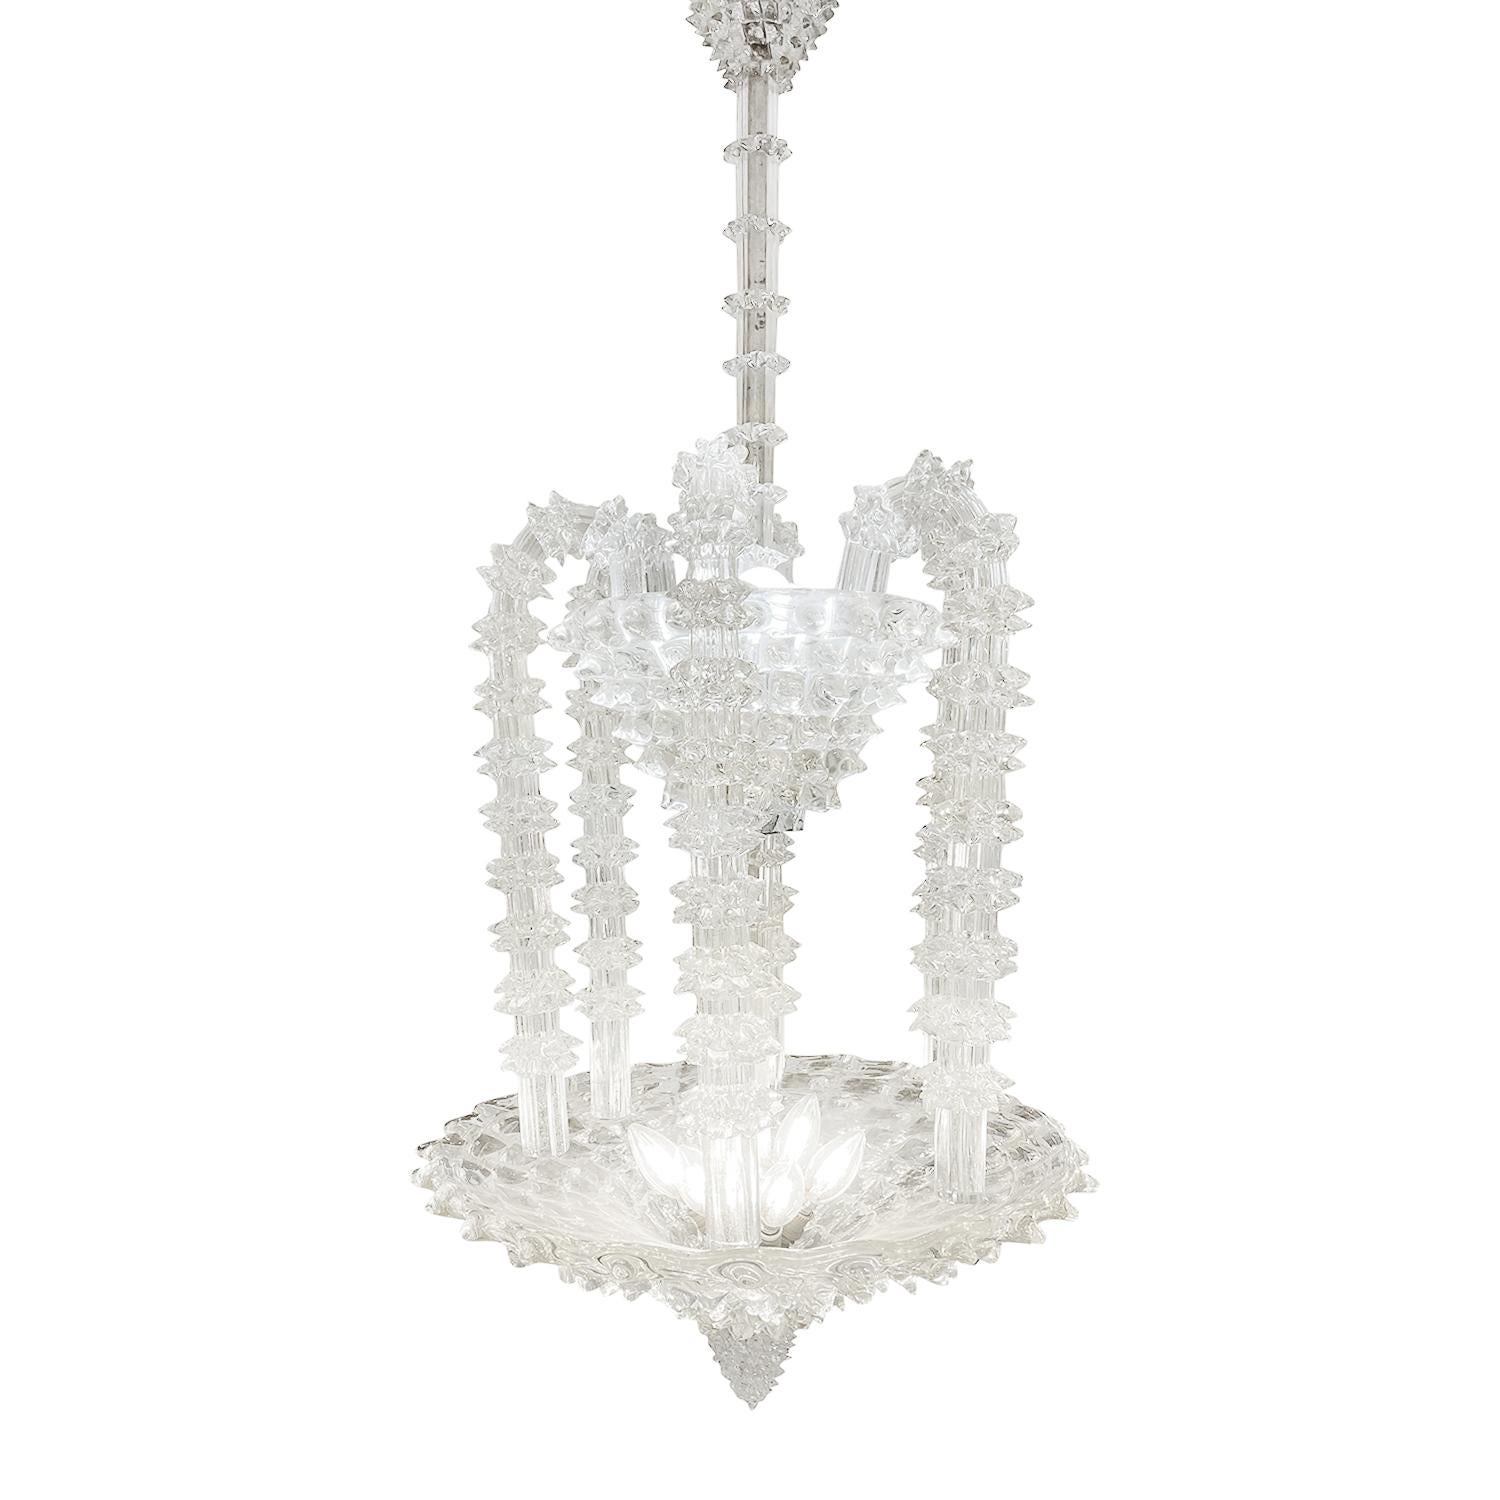 A vintage Mid-Century Modern Italian chandelier made of hand blown smoked Murano glass, designed by Ercole Barovier and produced by Barovier & Toso in good condition. The detailed tall, round pendant is composed with six twisted drops which are